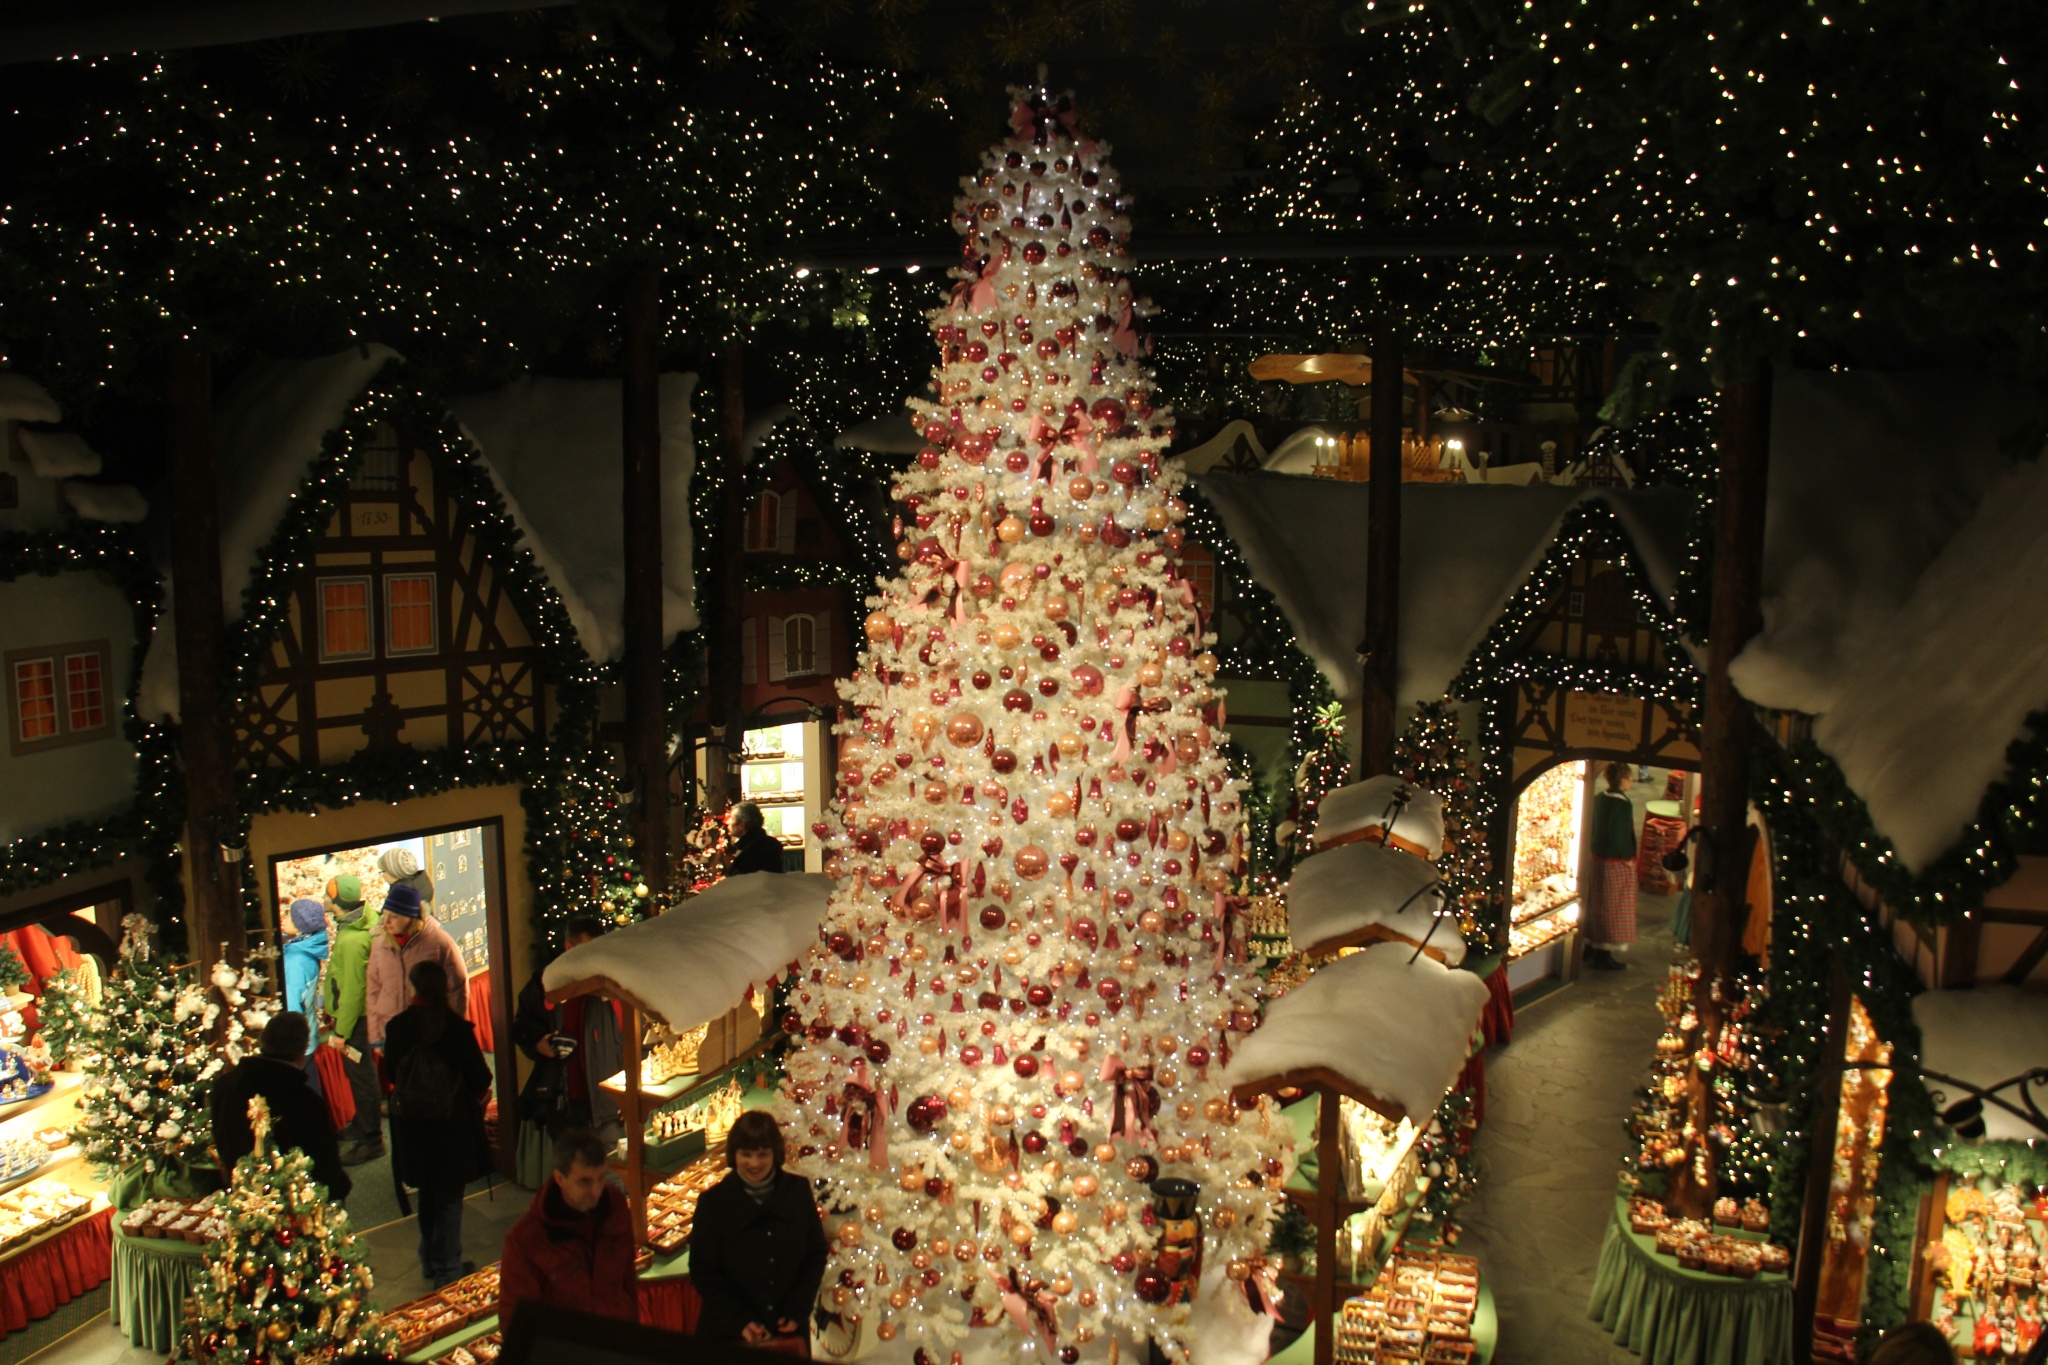 Christmas stores abound in Rothenburg ob der Tauber, Germany.